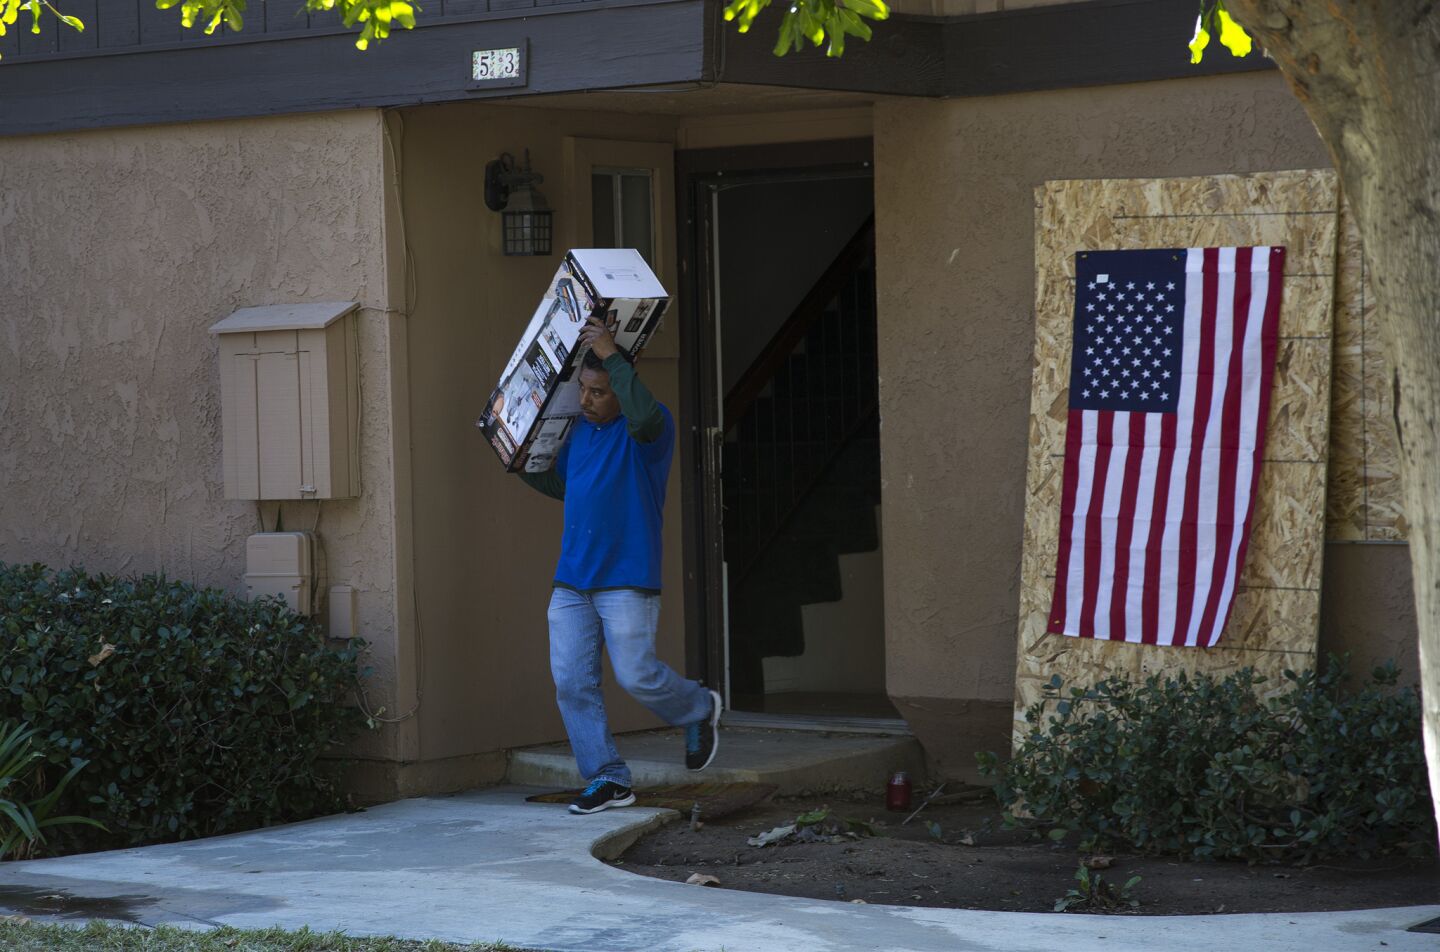 A hired mover carries out personal items from the home of San Bernardino shooters Syed Rizwan Farook and Tashfeen Malik.